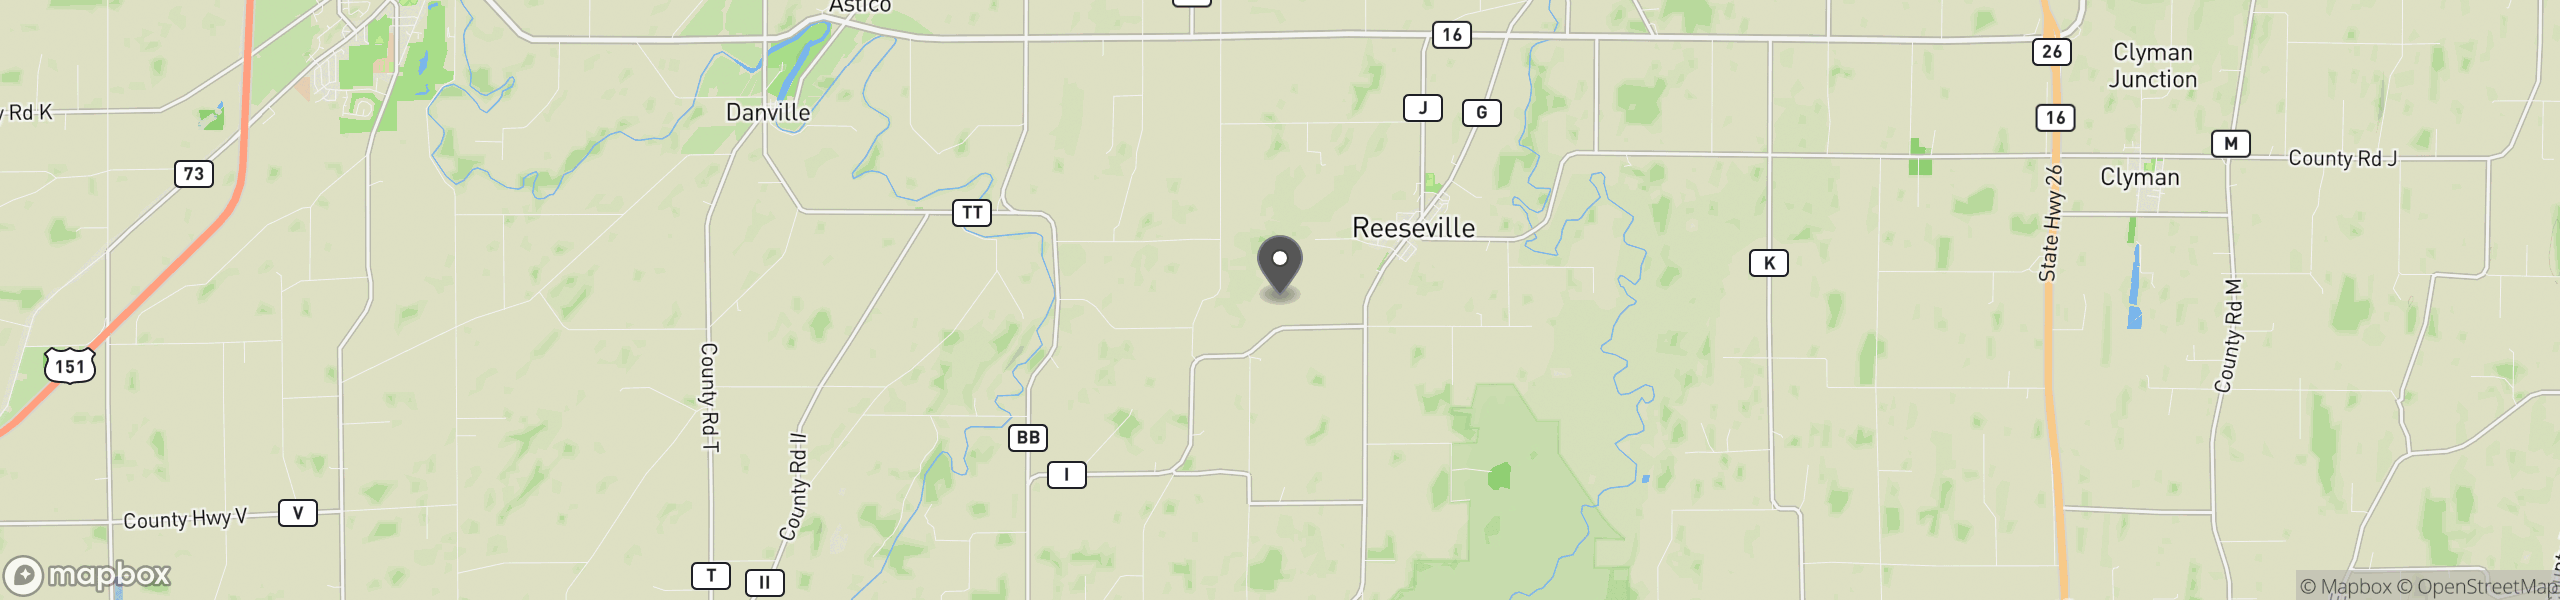 Reeseville, WI 53579